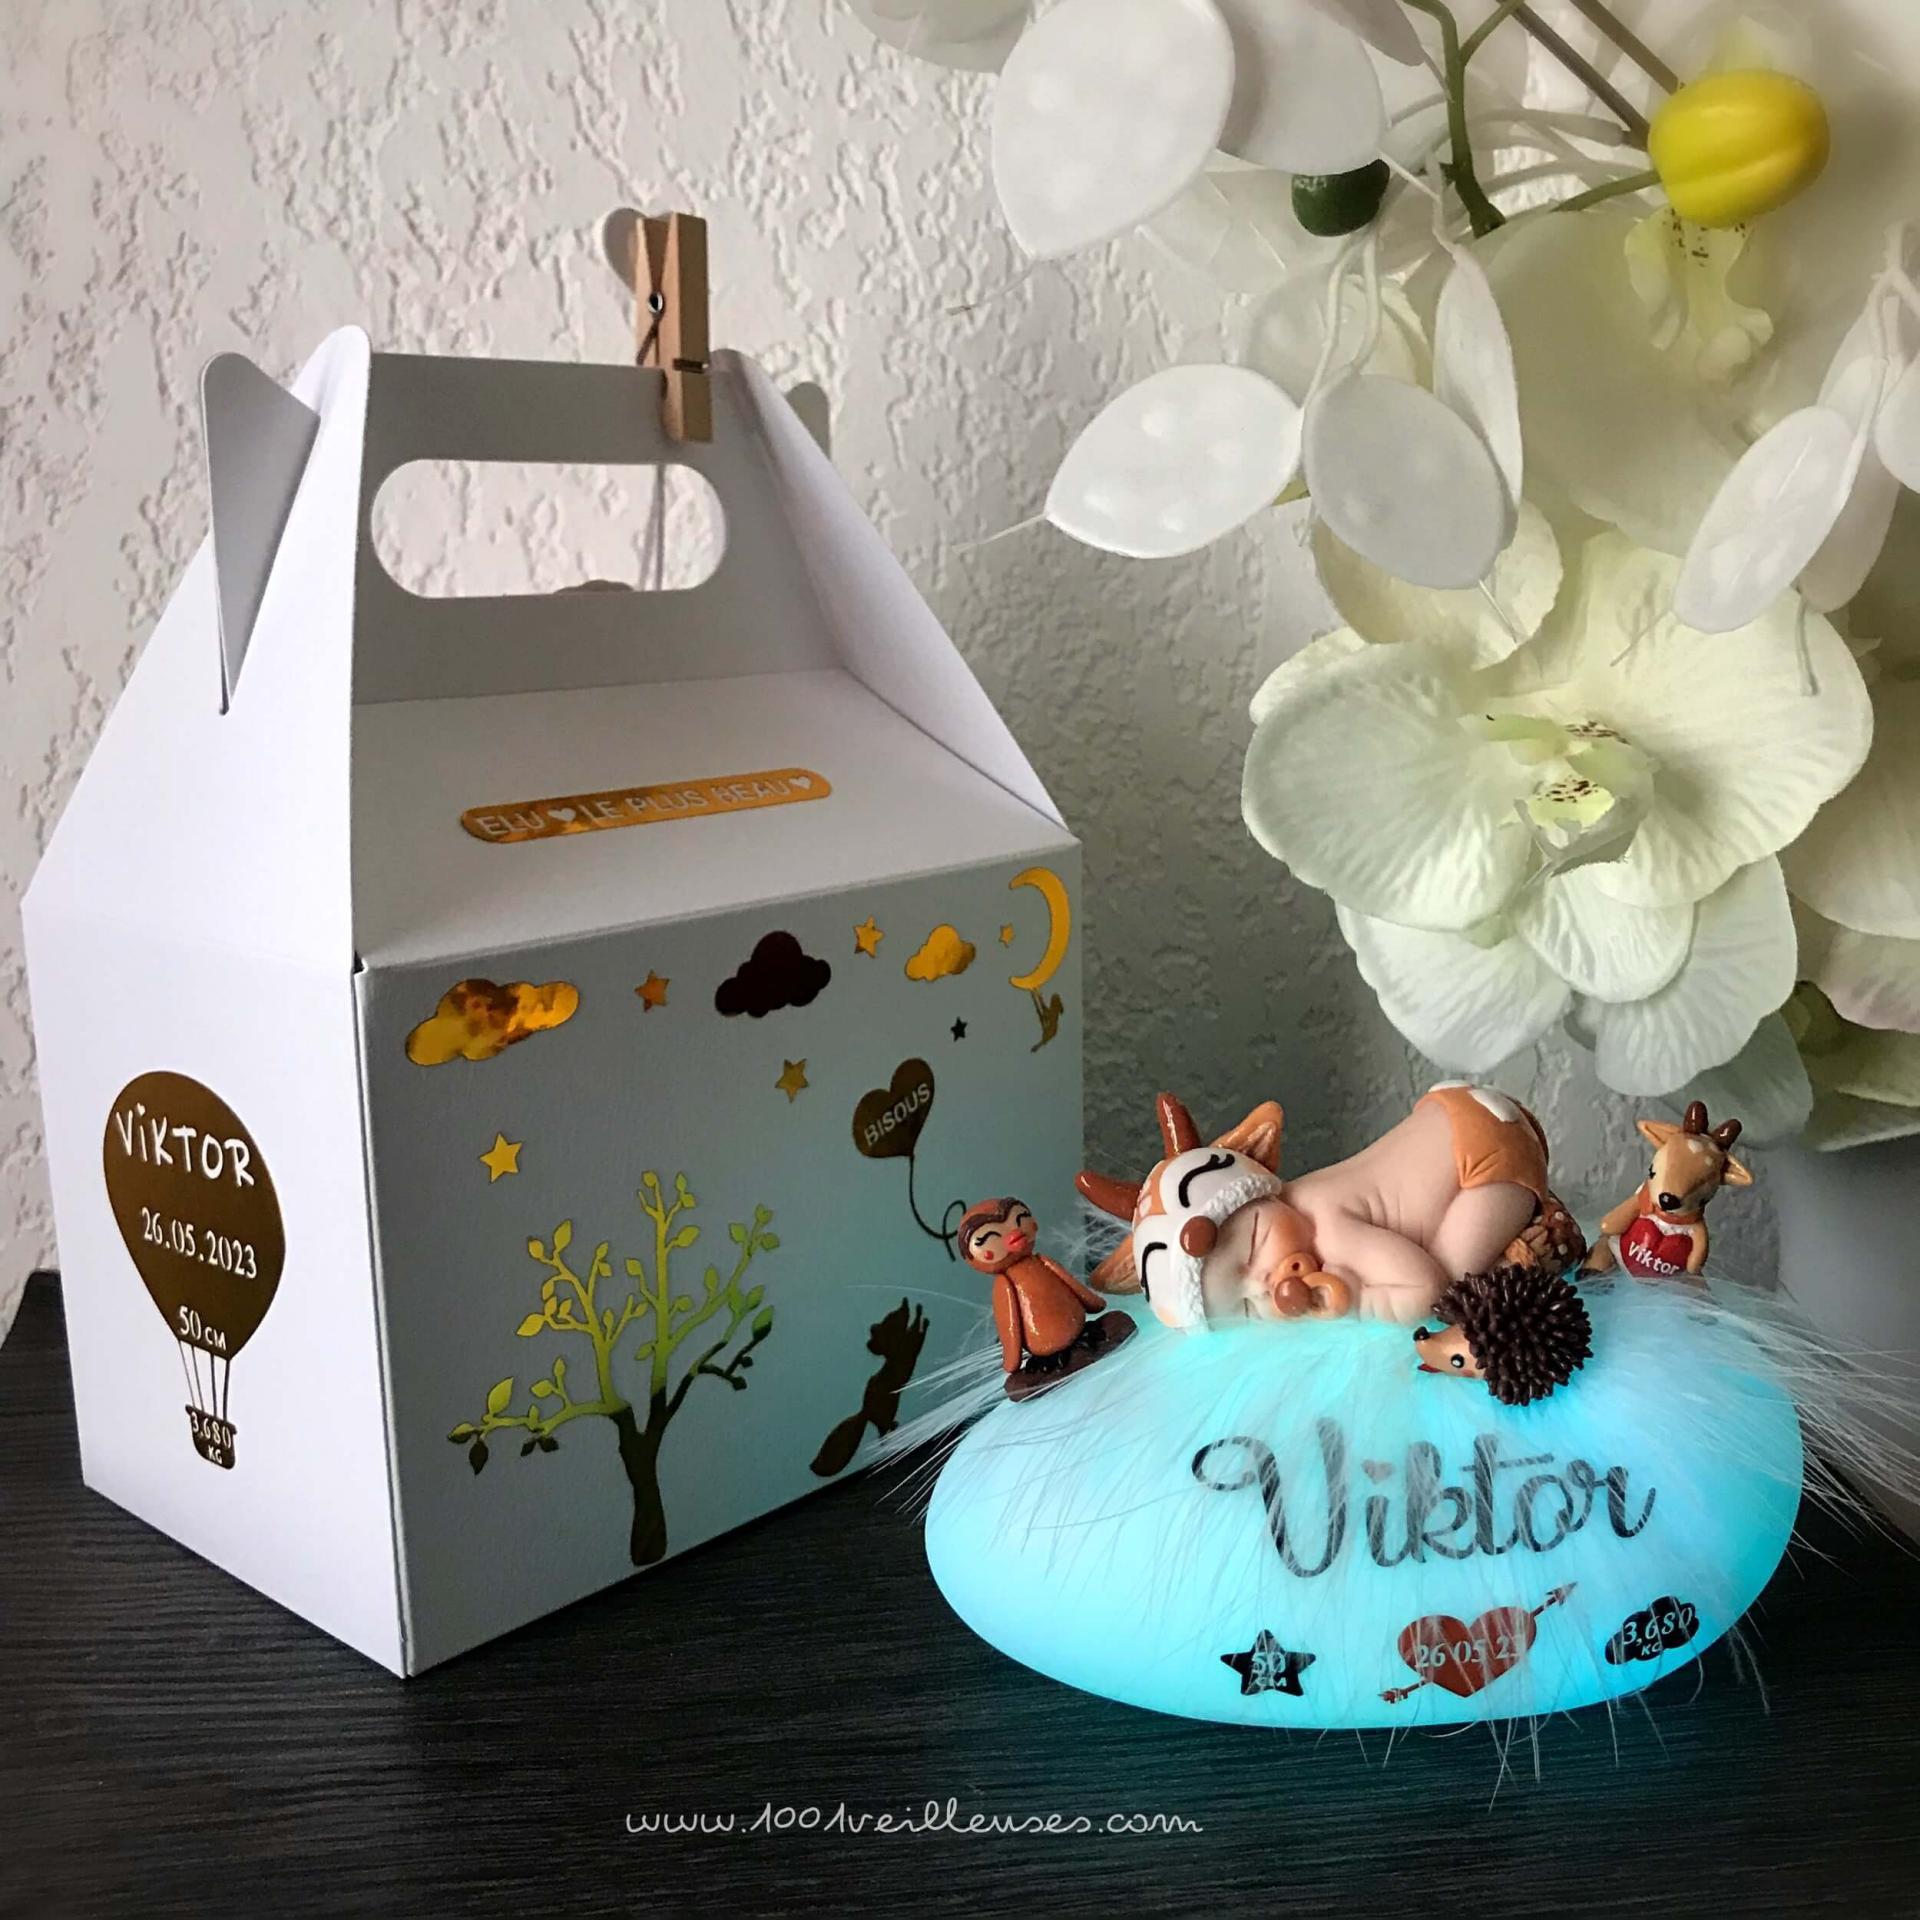 Back view of the personalized night light with a baby sculpted in fimo dressed as a fawn, next to its matching personalized gift box, illuminated night light